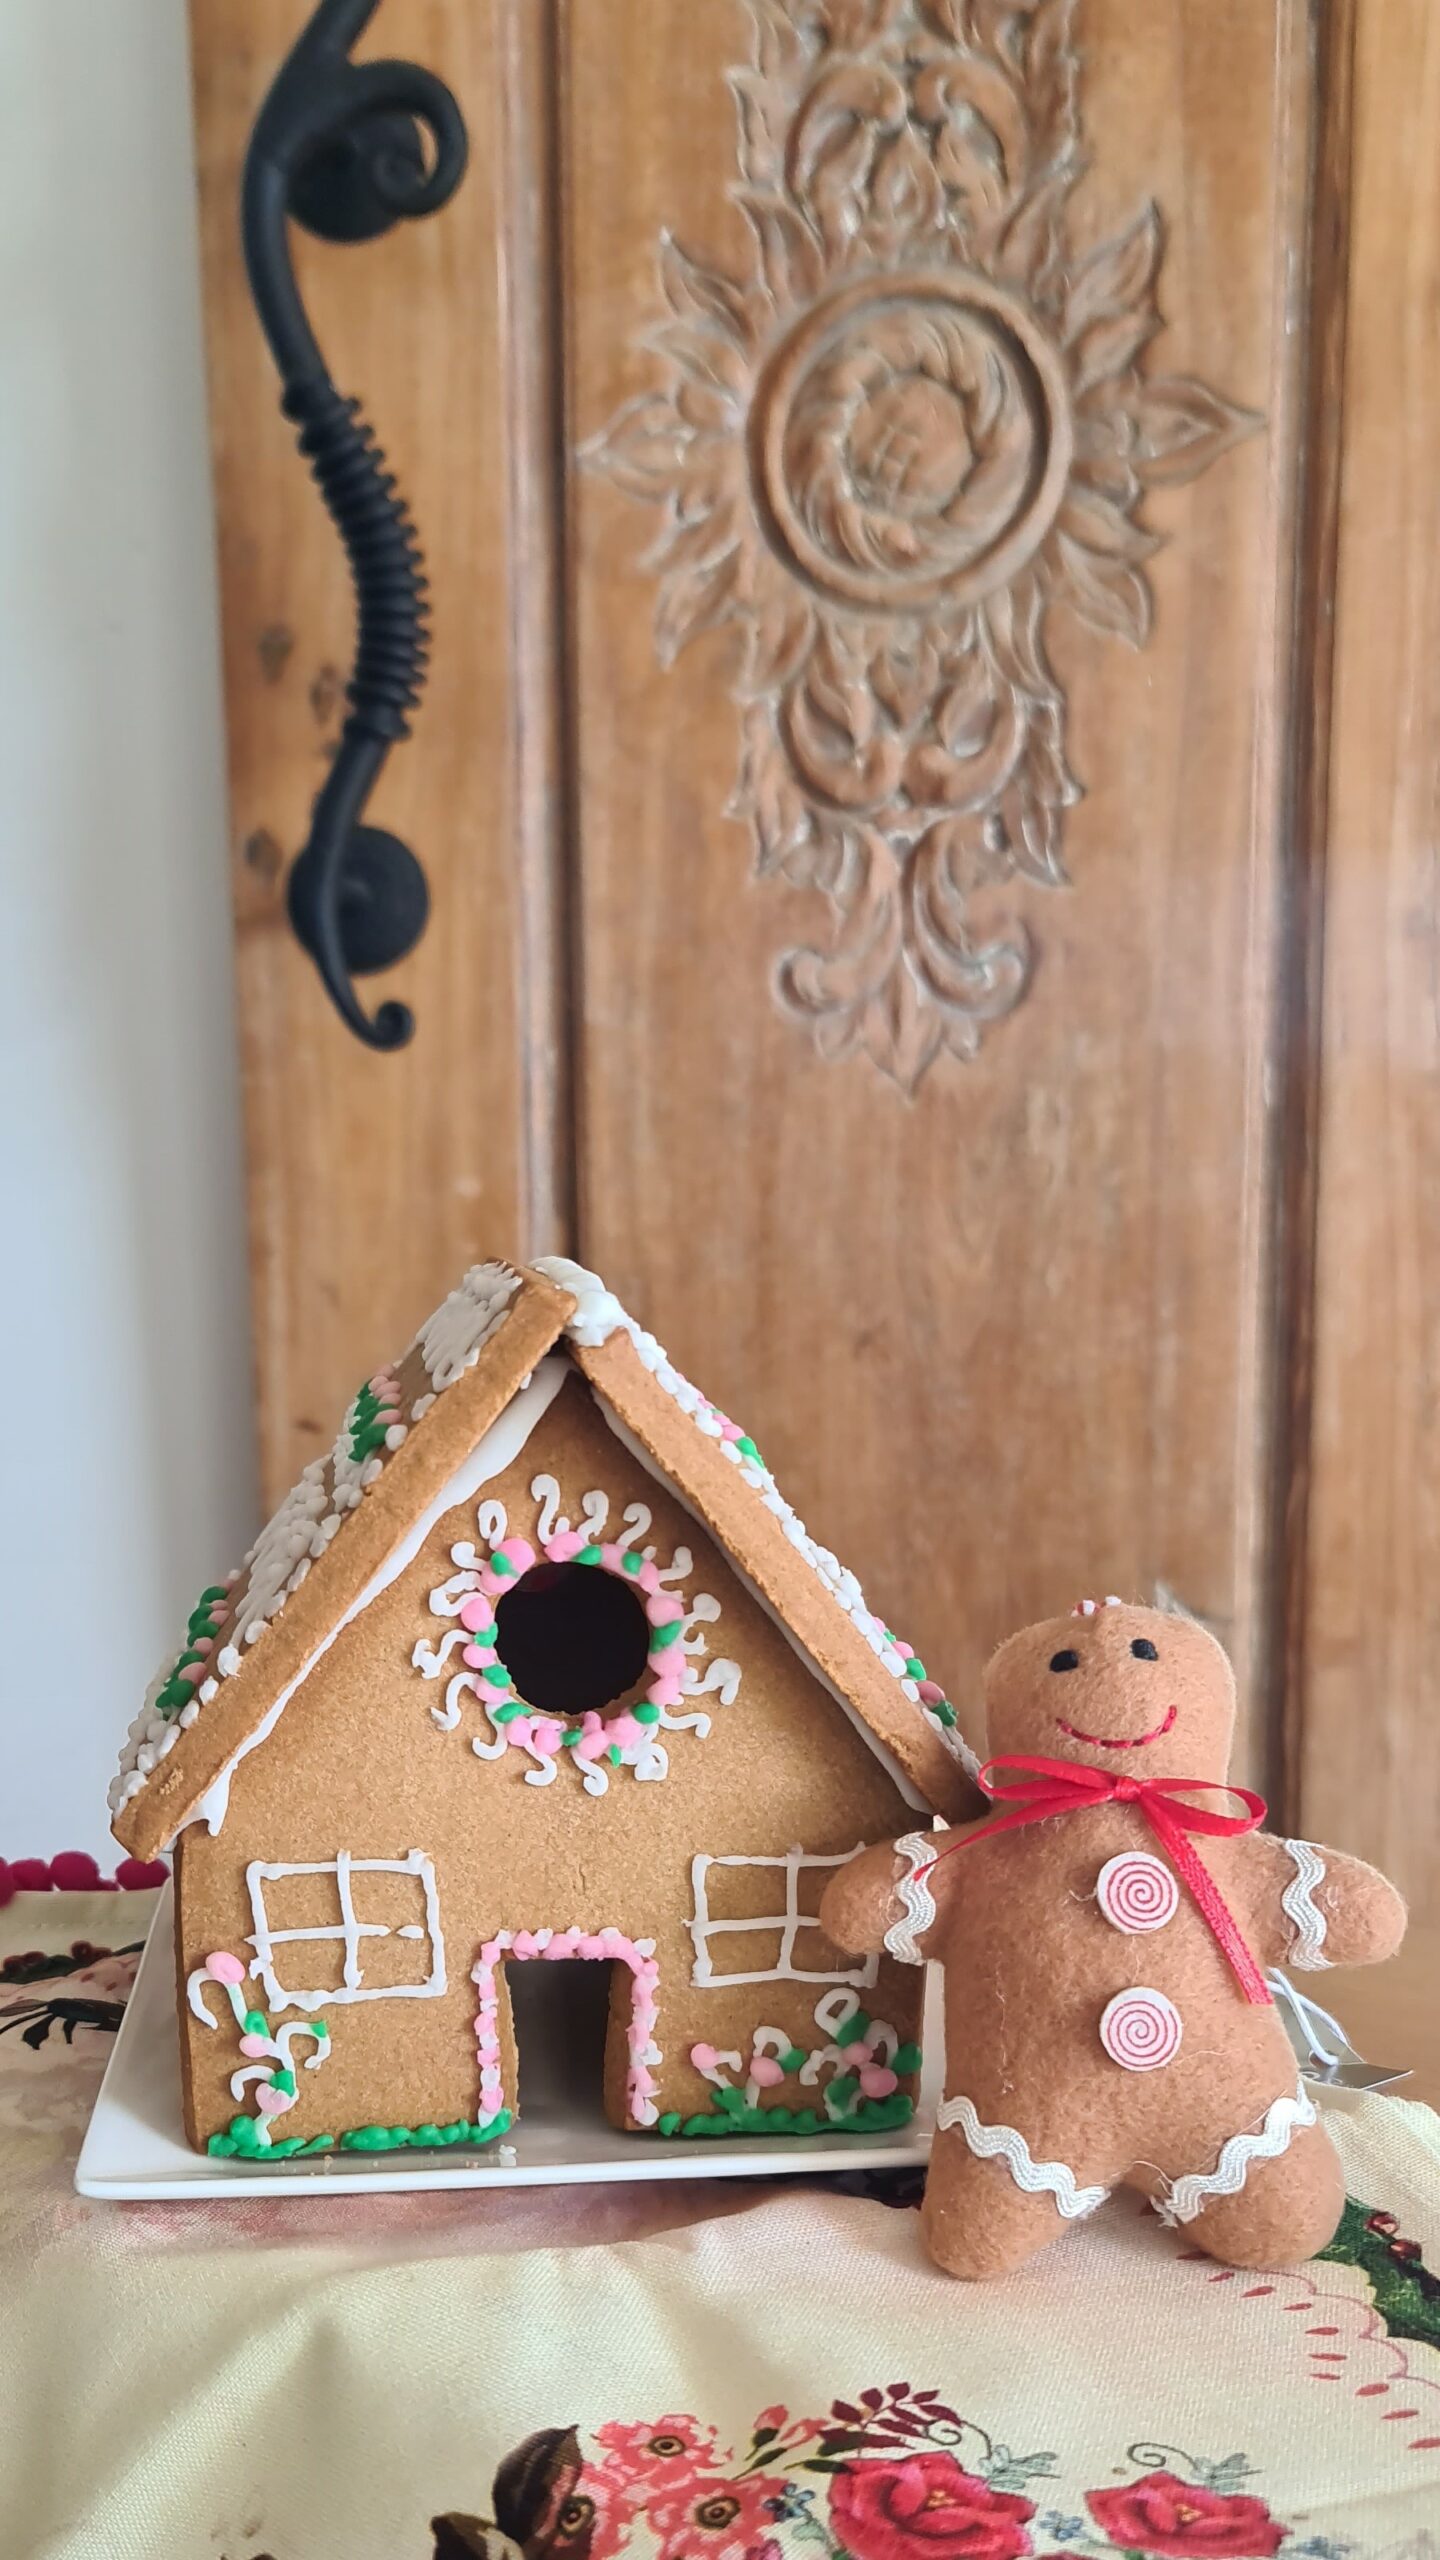 Friday morning – Gingerbread House Decorating